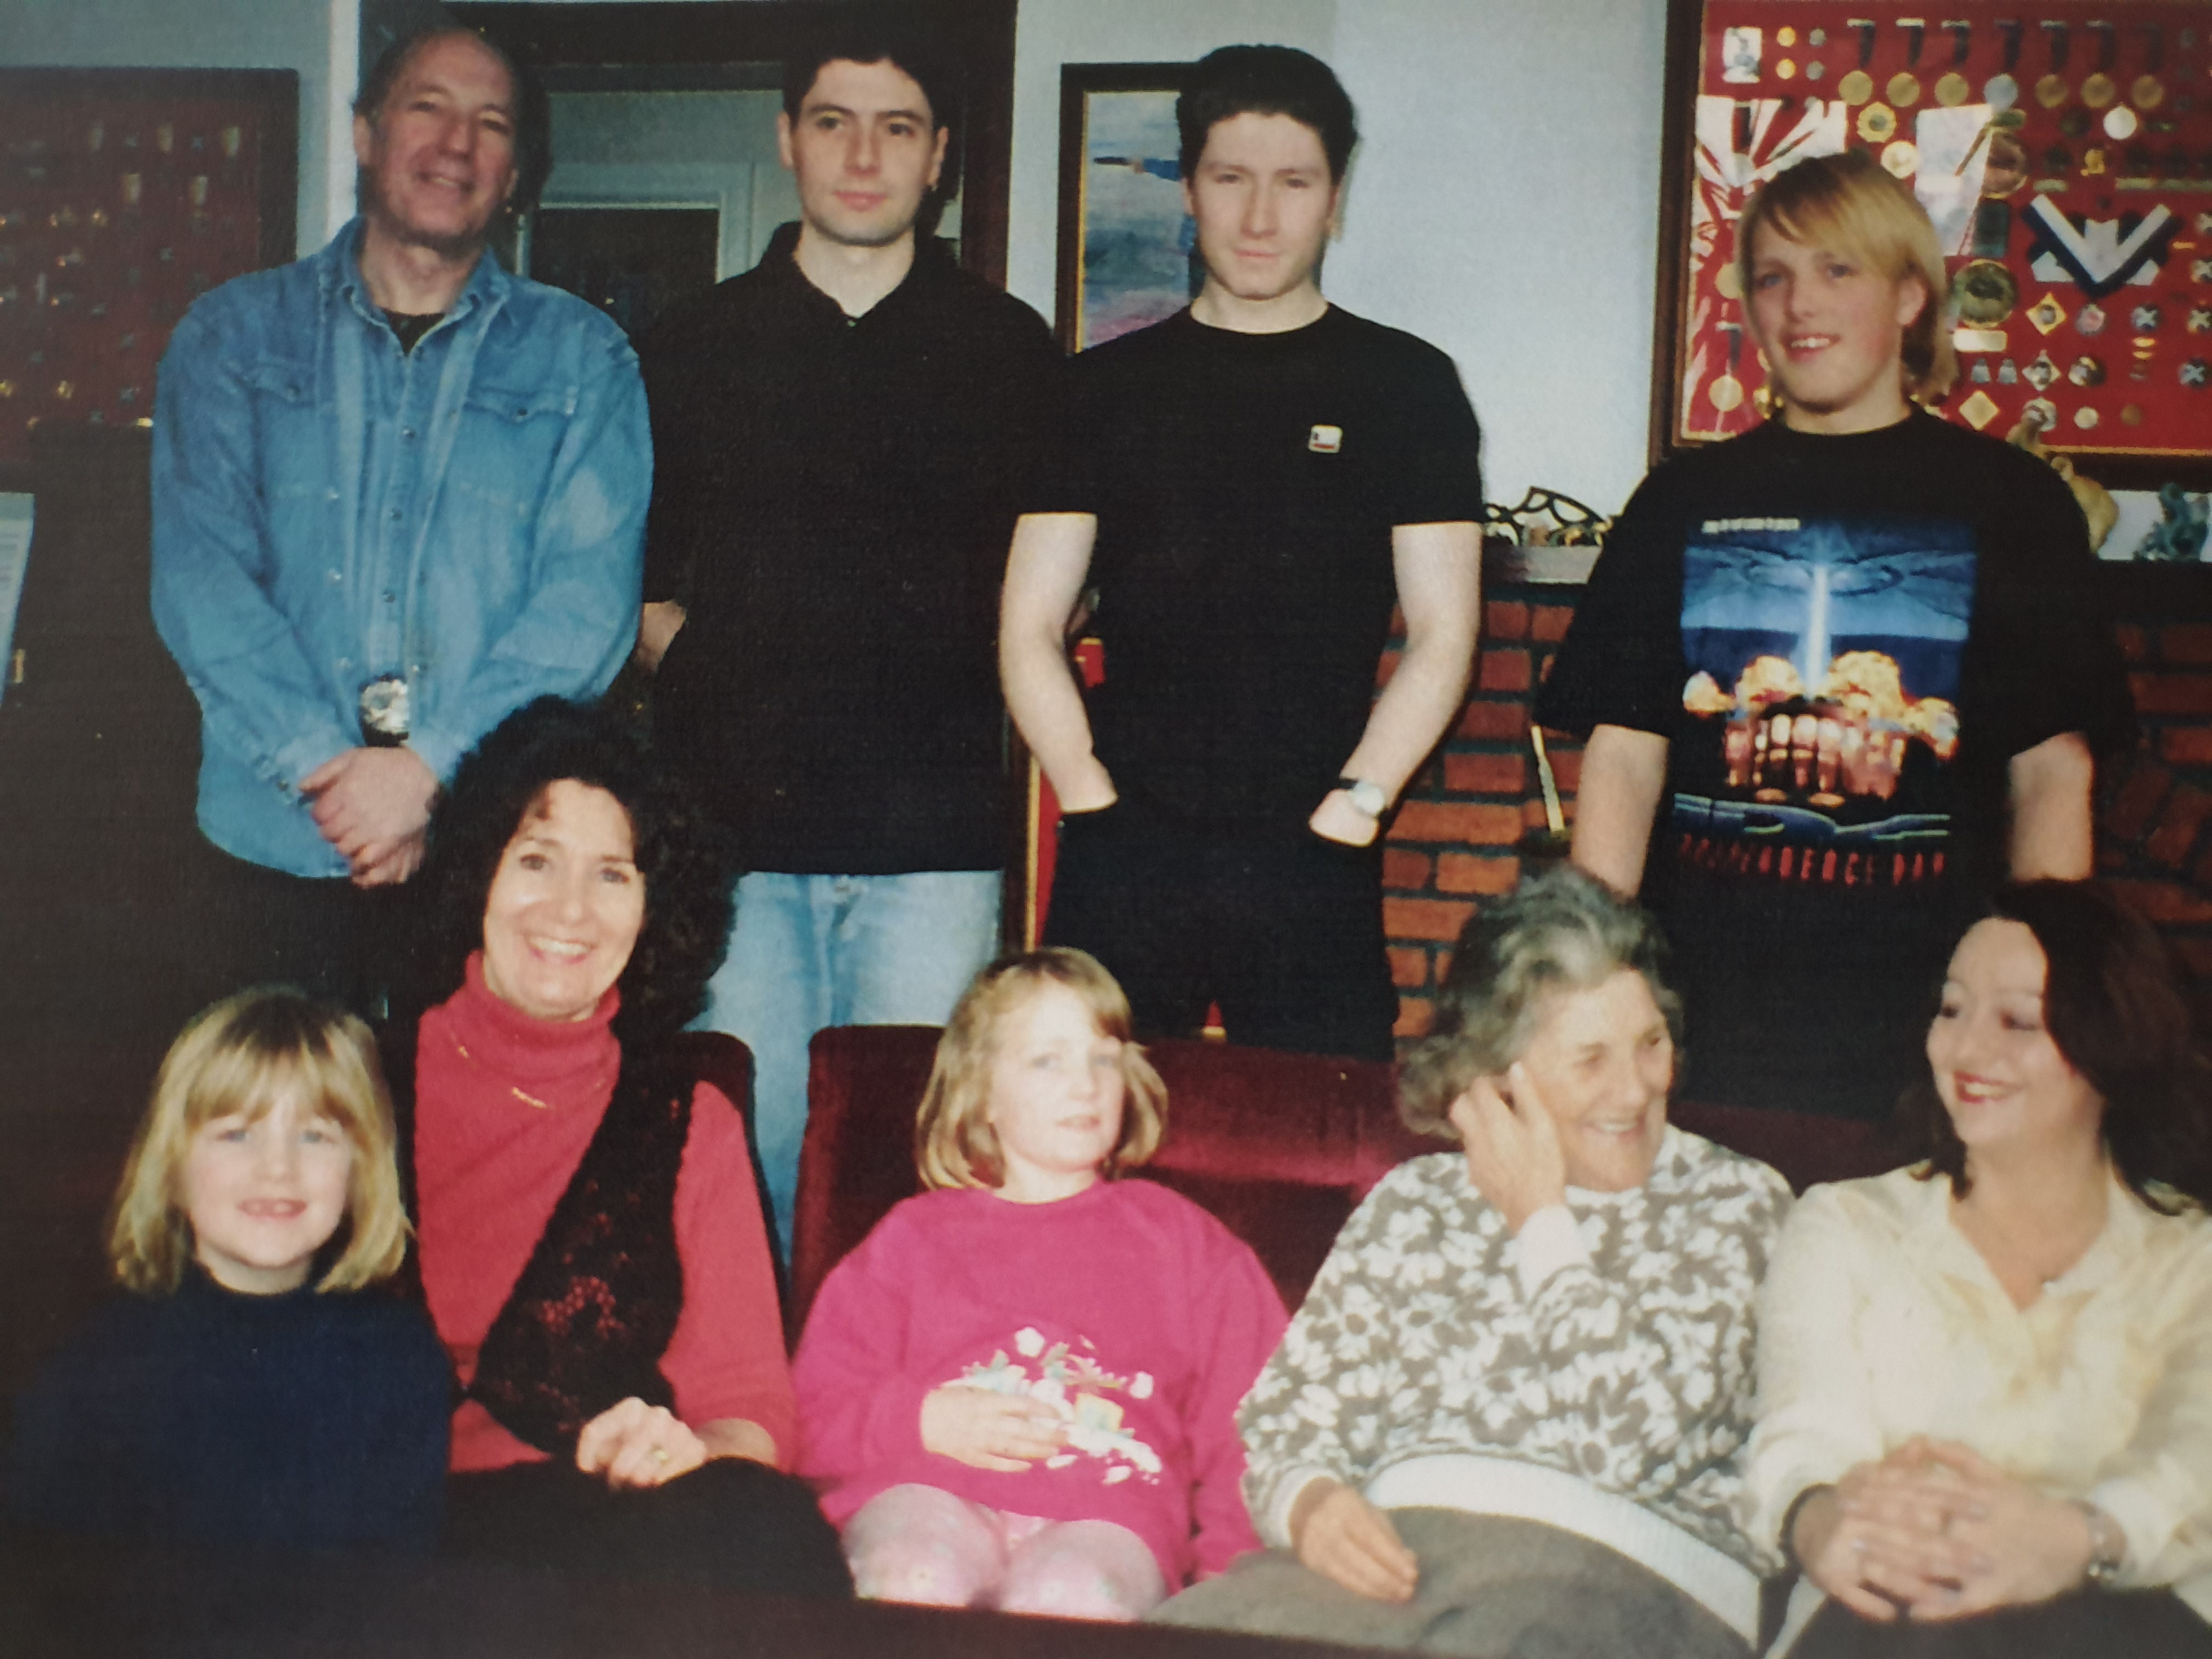 Dan with his Uncle Tom, Aunt Anne, cousins Thomas and Stephen, sisters, grandmother, and a woman who's probably the girlfriend of one of his cousins